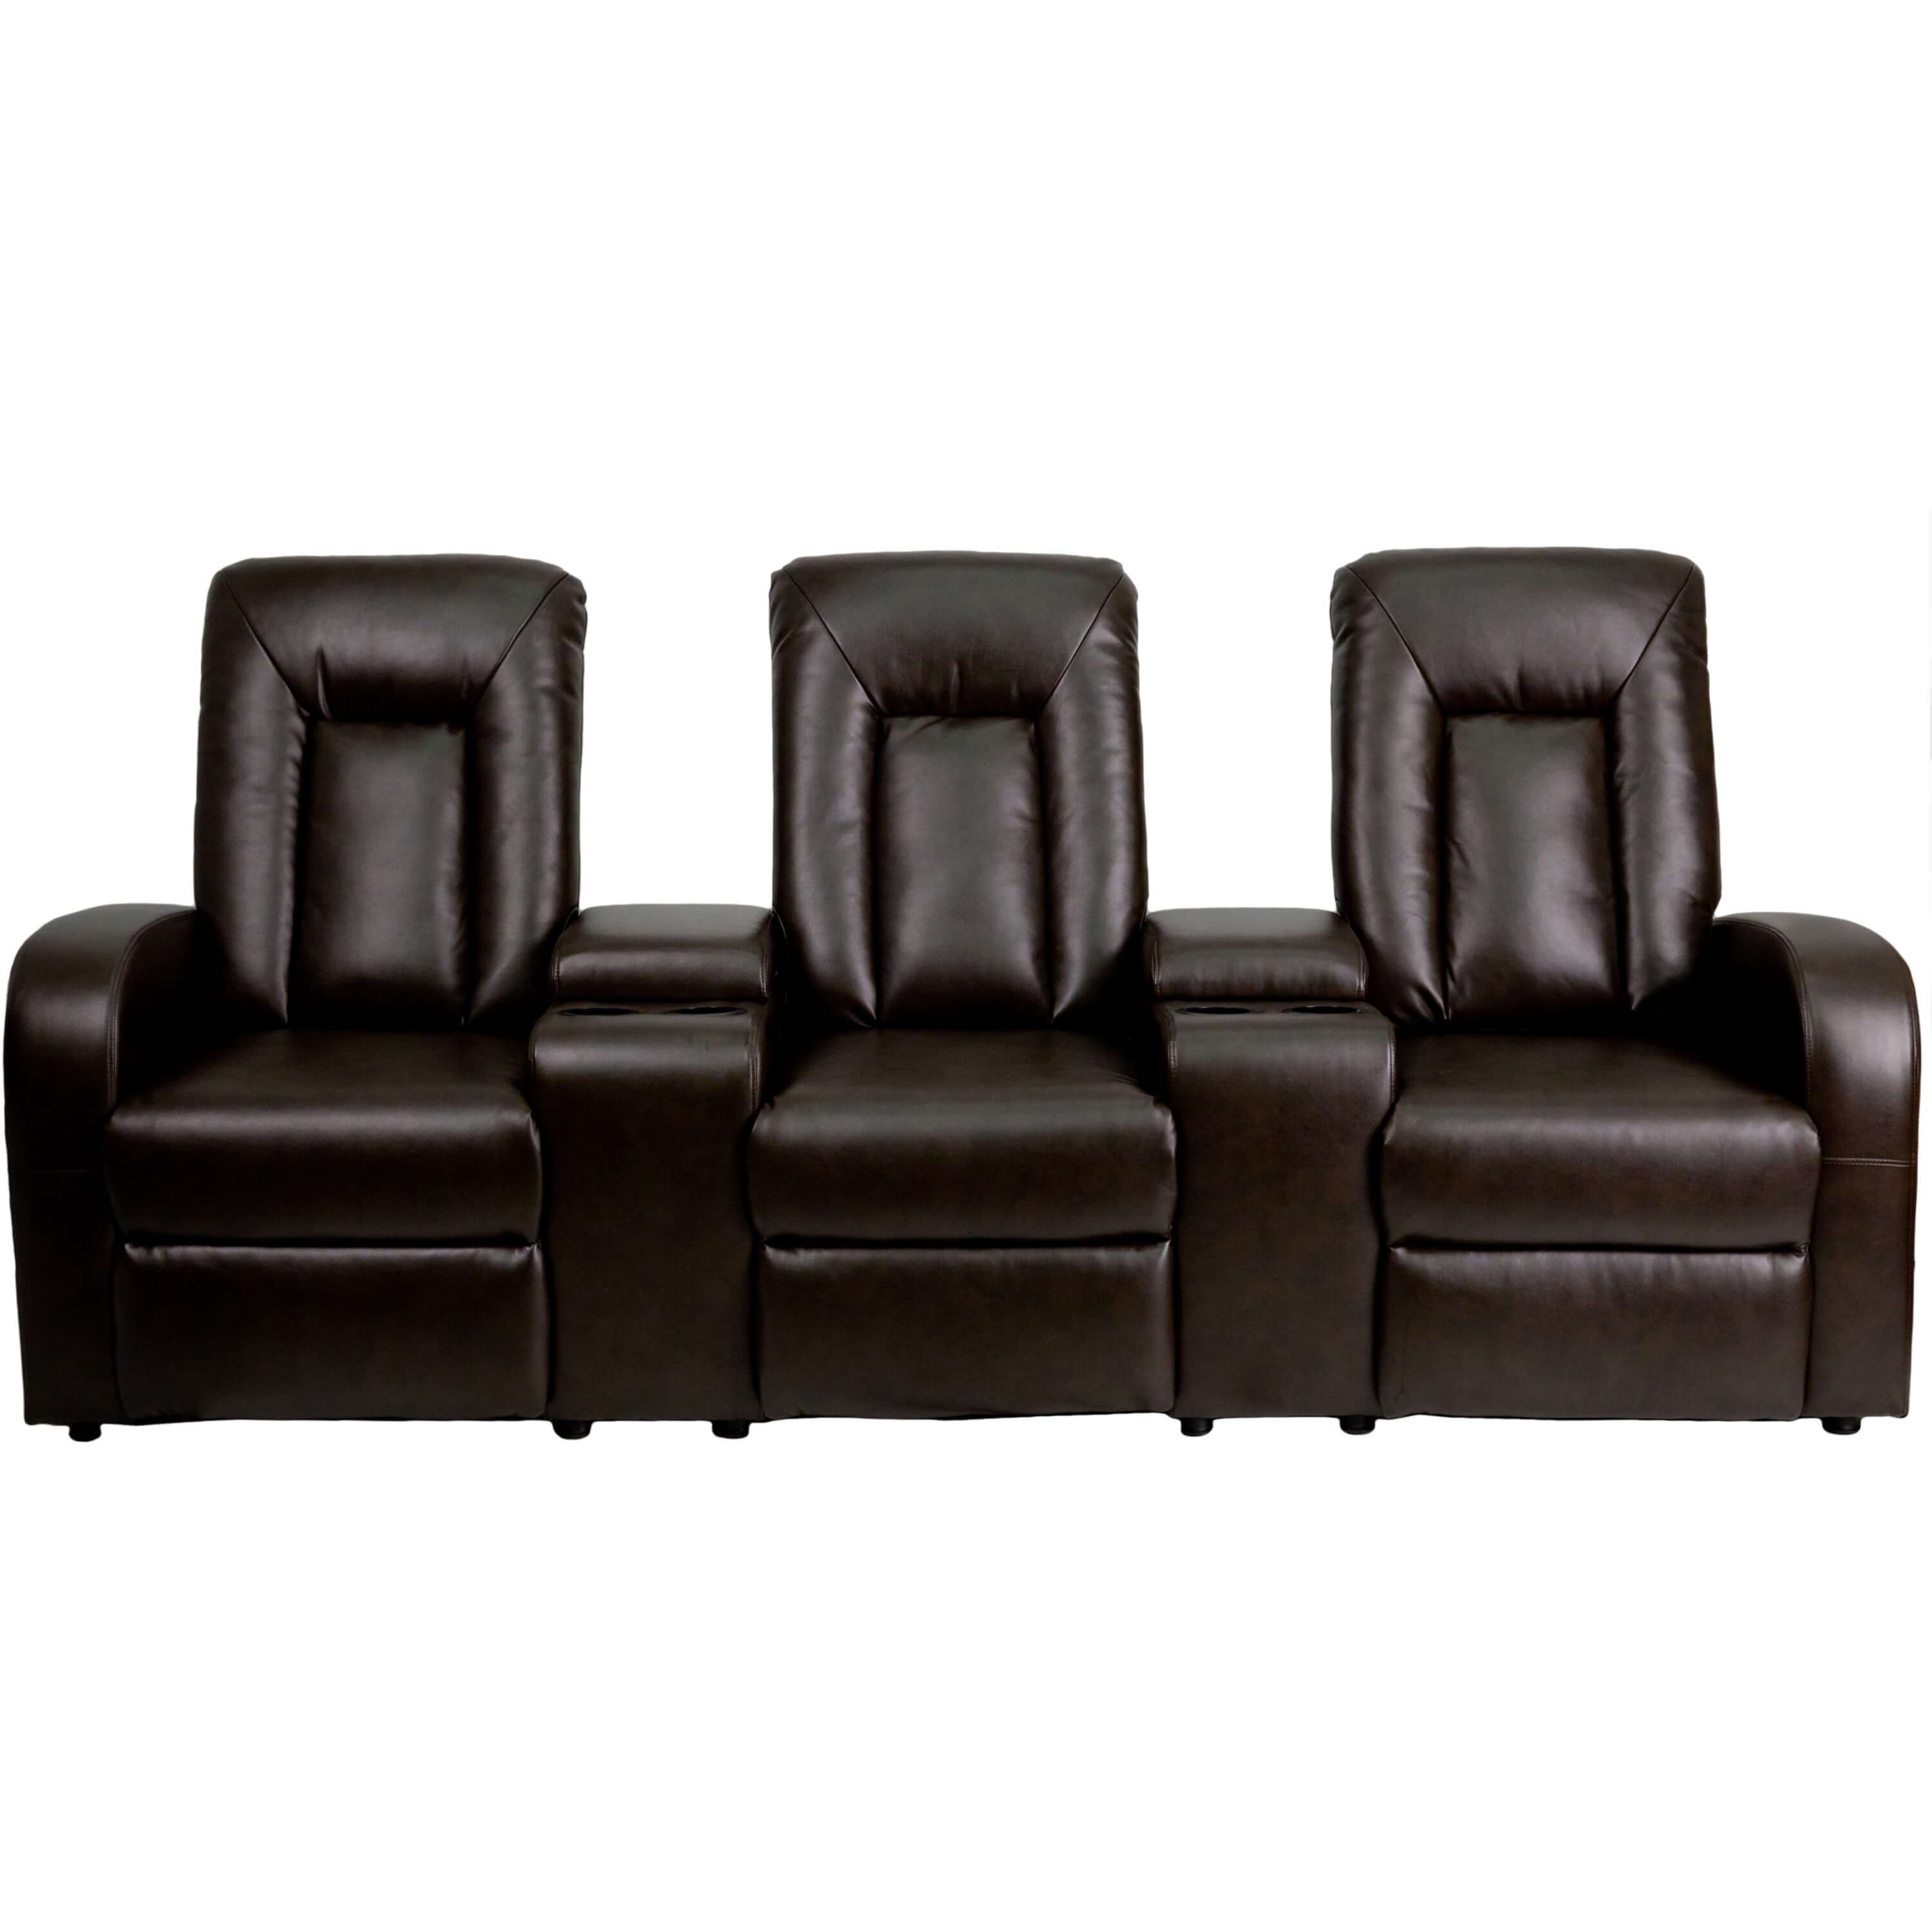 home-theatre-seating-leather-home-theater-seating.jpg